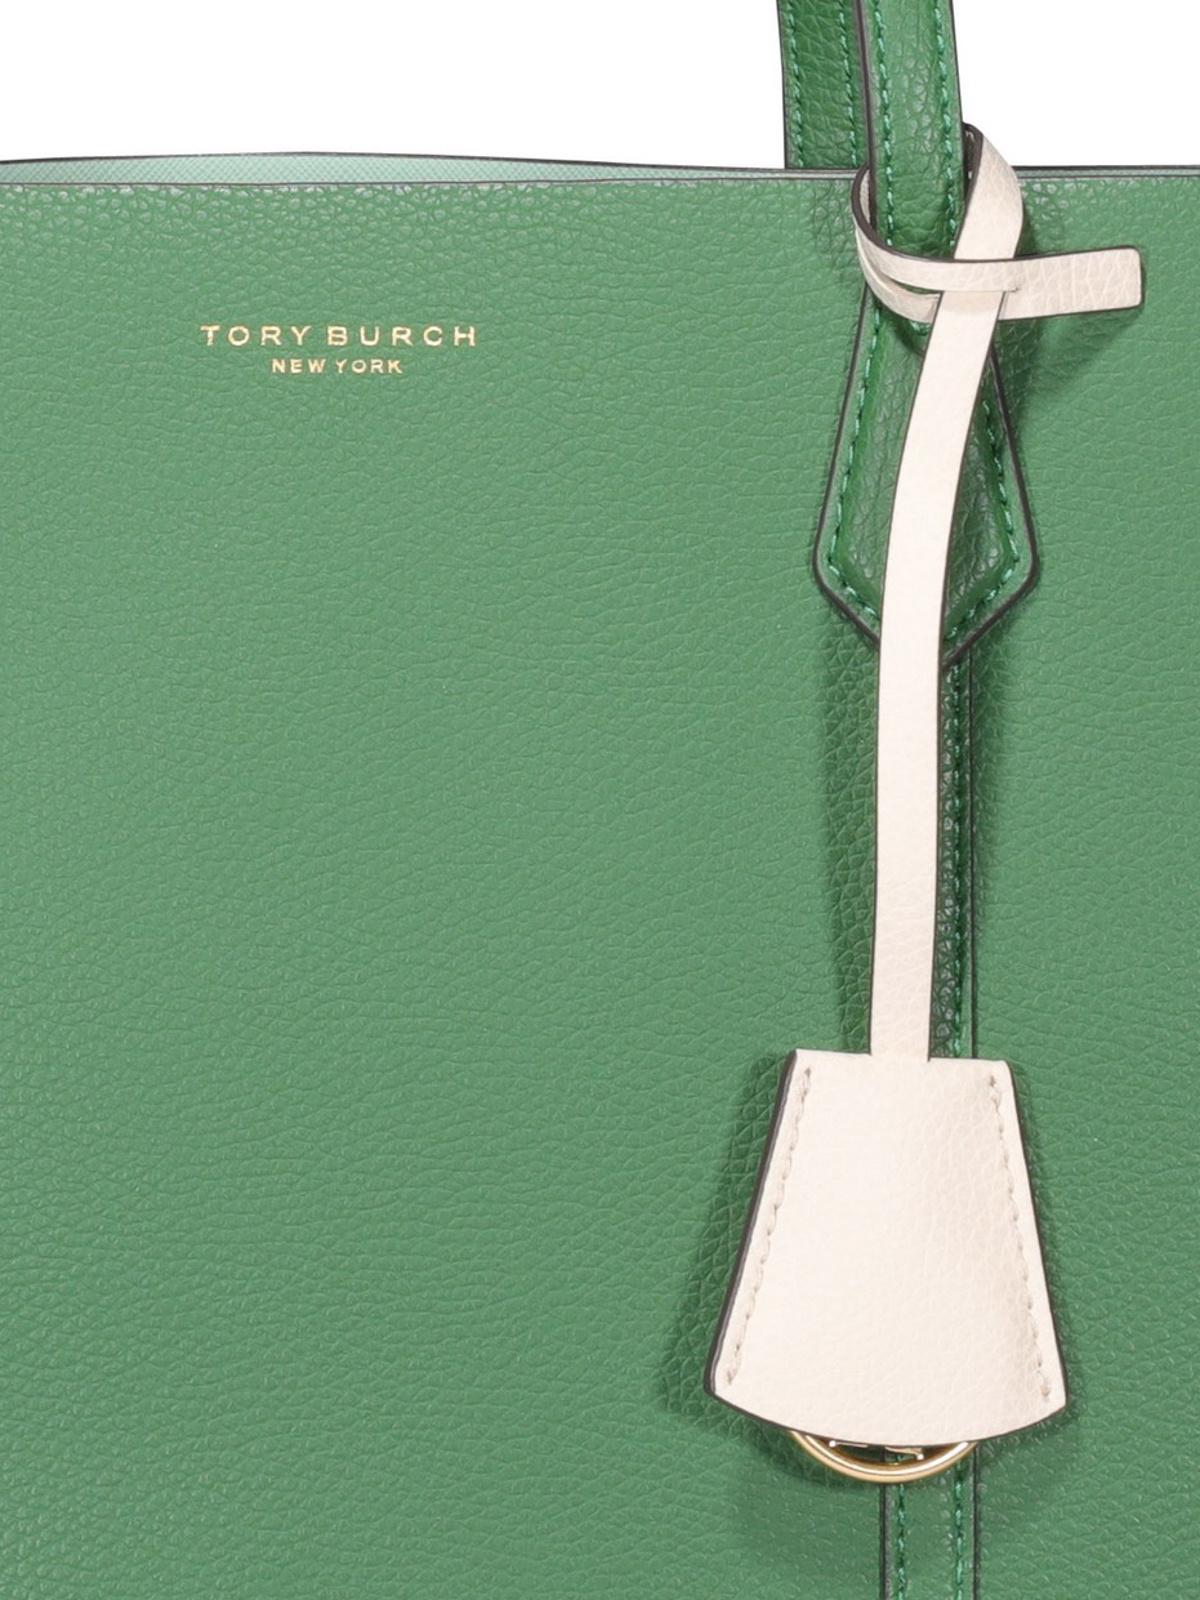 Tory Burch Perry leather tote bag, Green